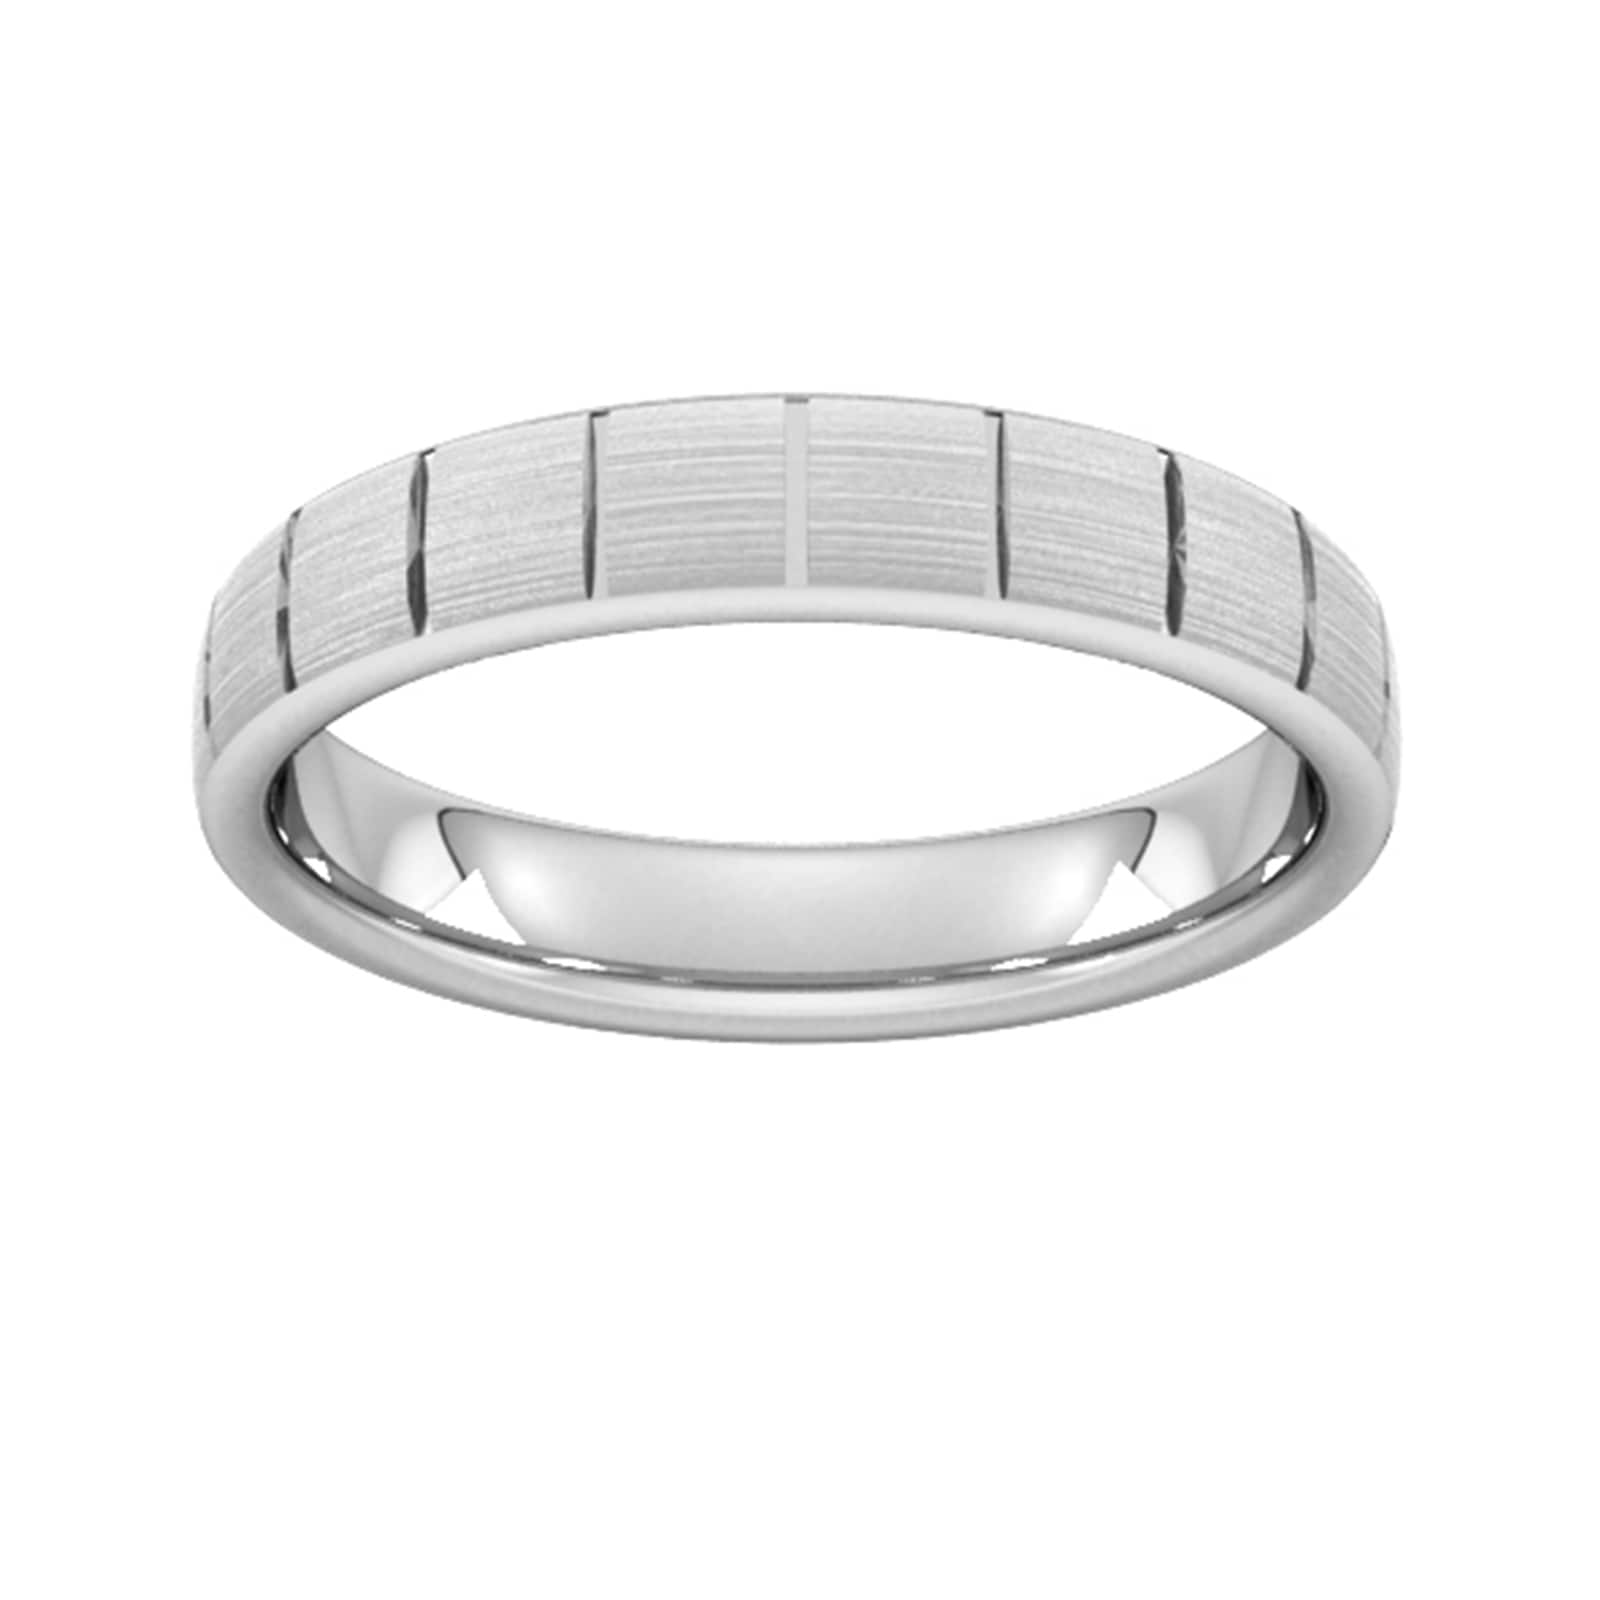 4mm traditional court standard vertical lines wedding ring in 18 carat white gold - ring size q